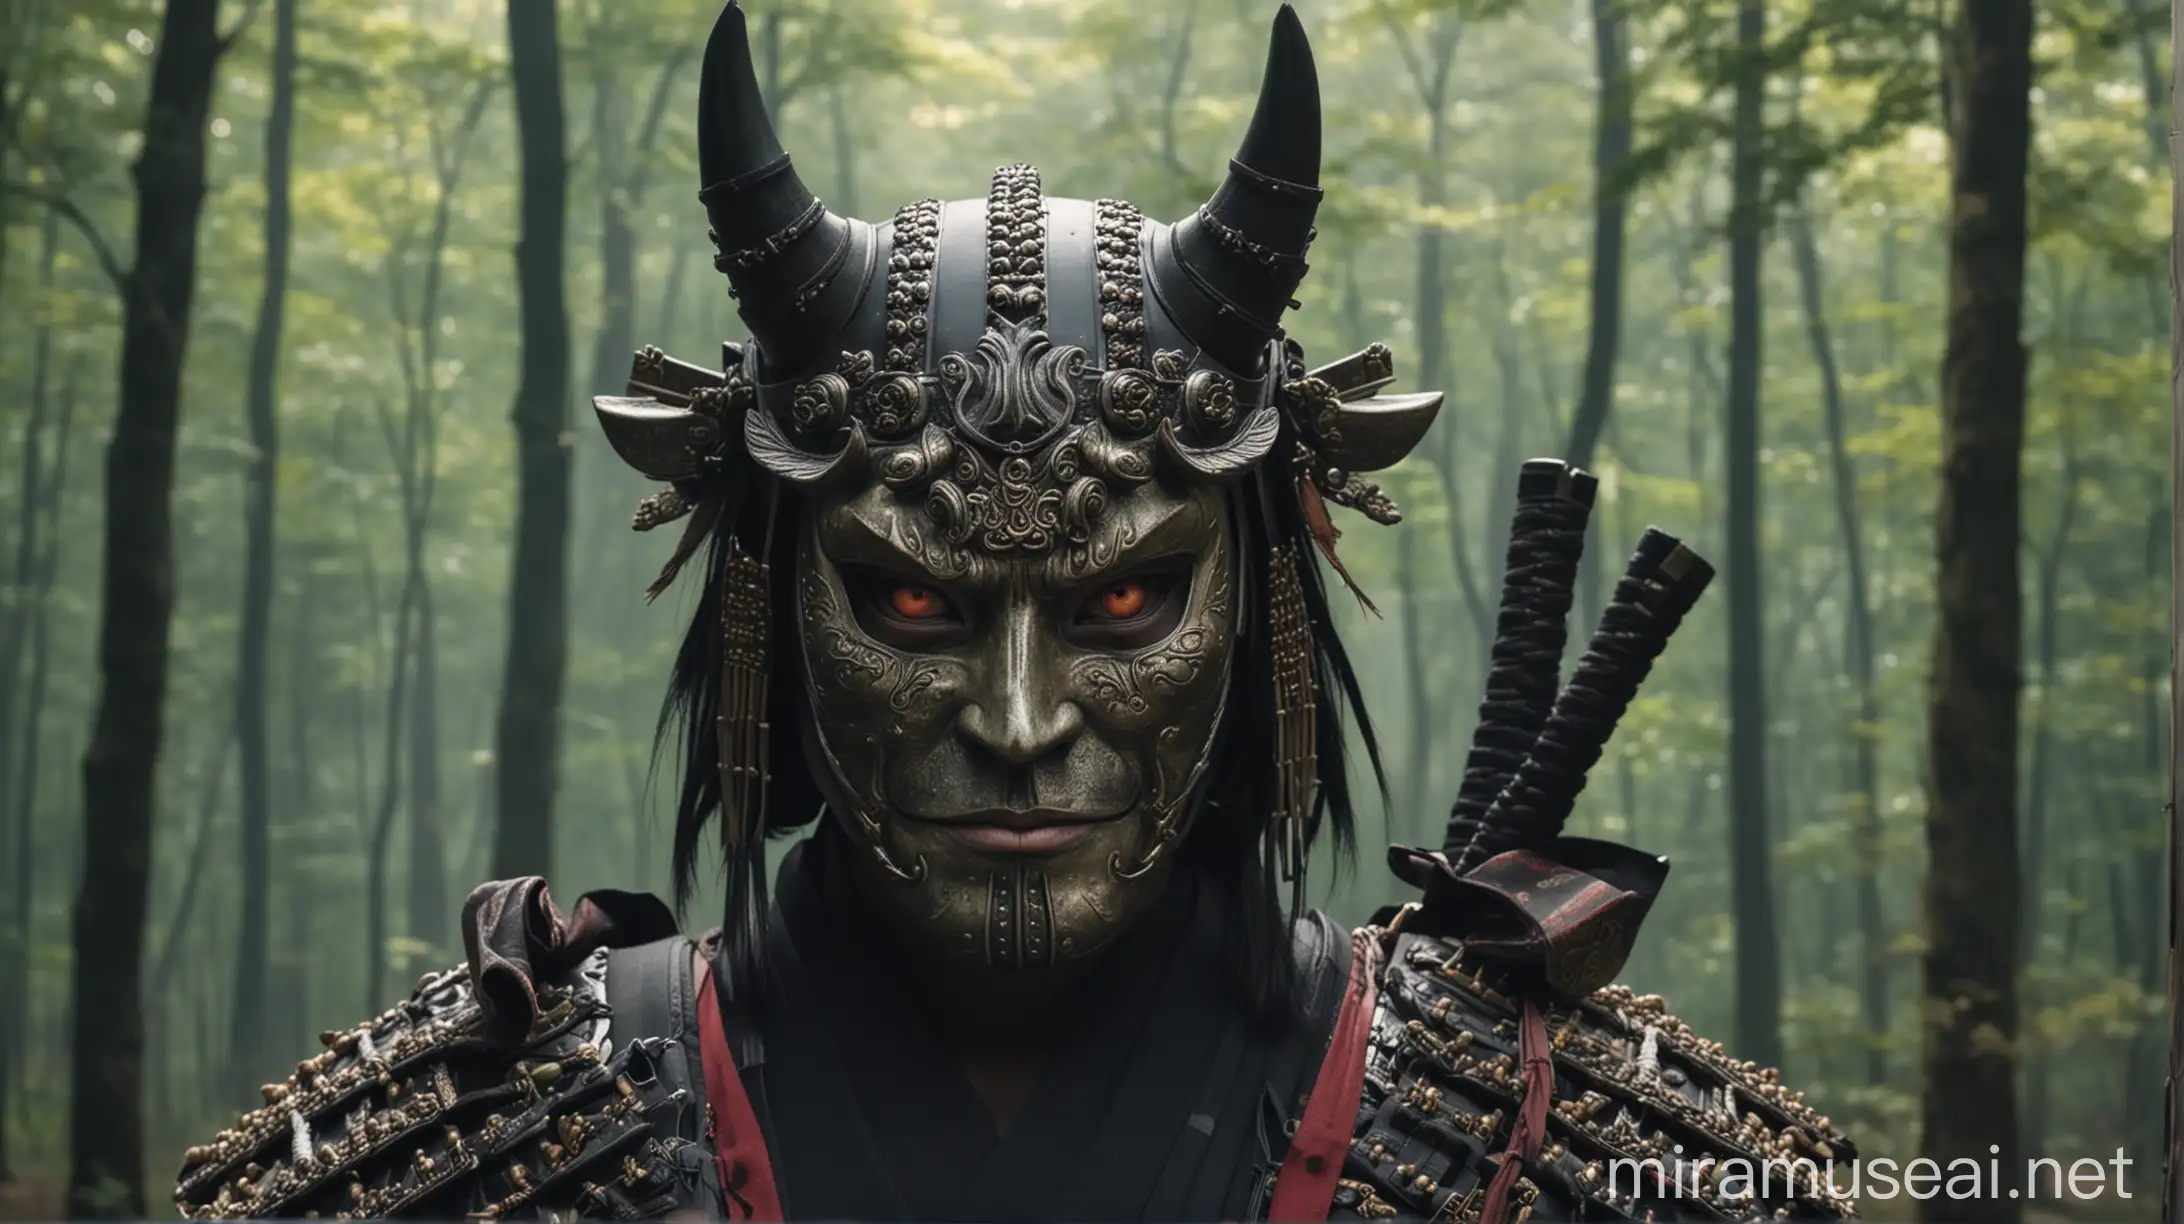 a samurai wearing half devil mask zoom in close face, show the eyes, wearing samurai ammor, wear katana and bow and background beautiful forest 